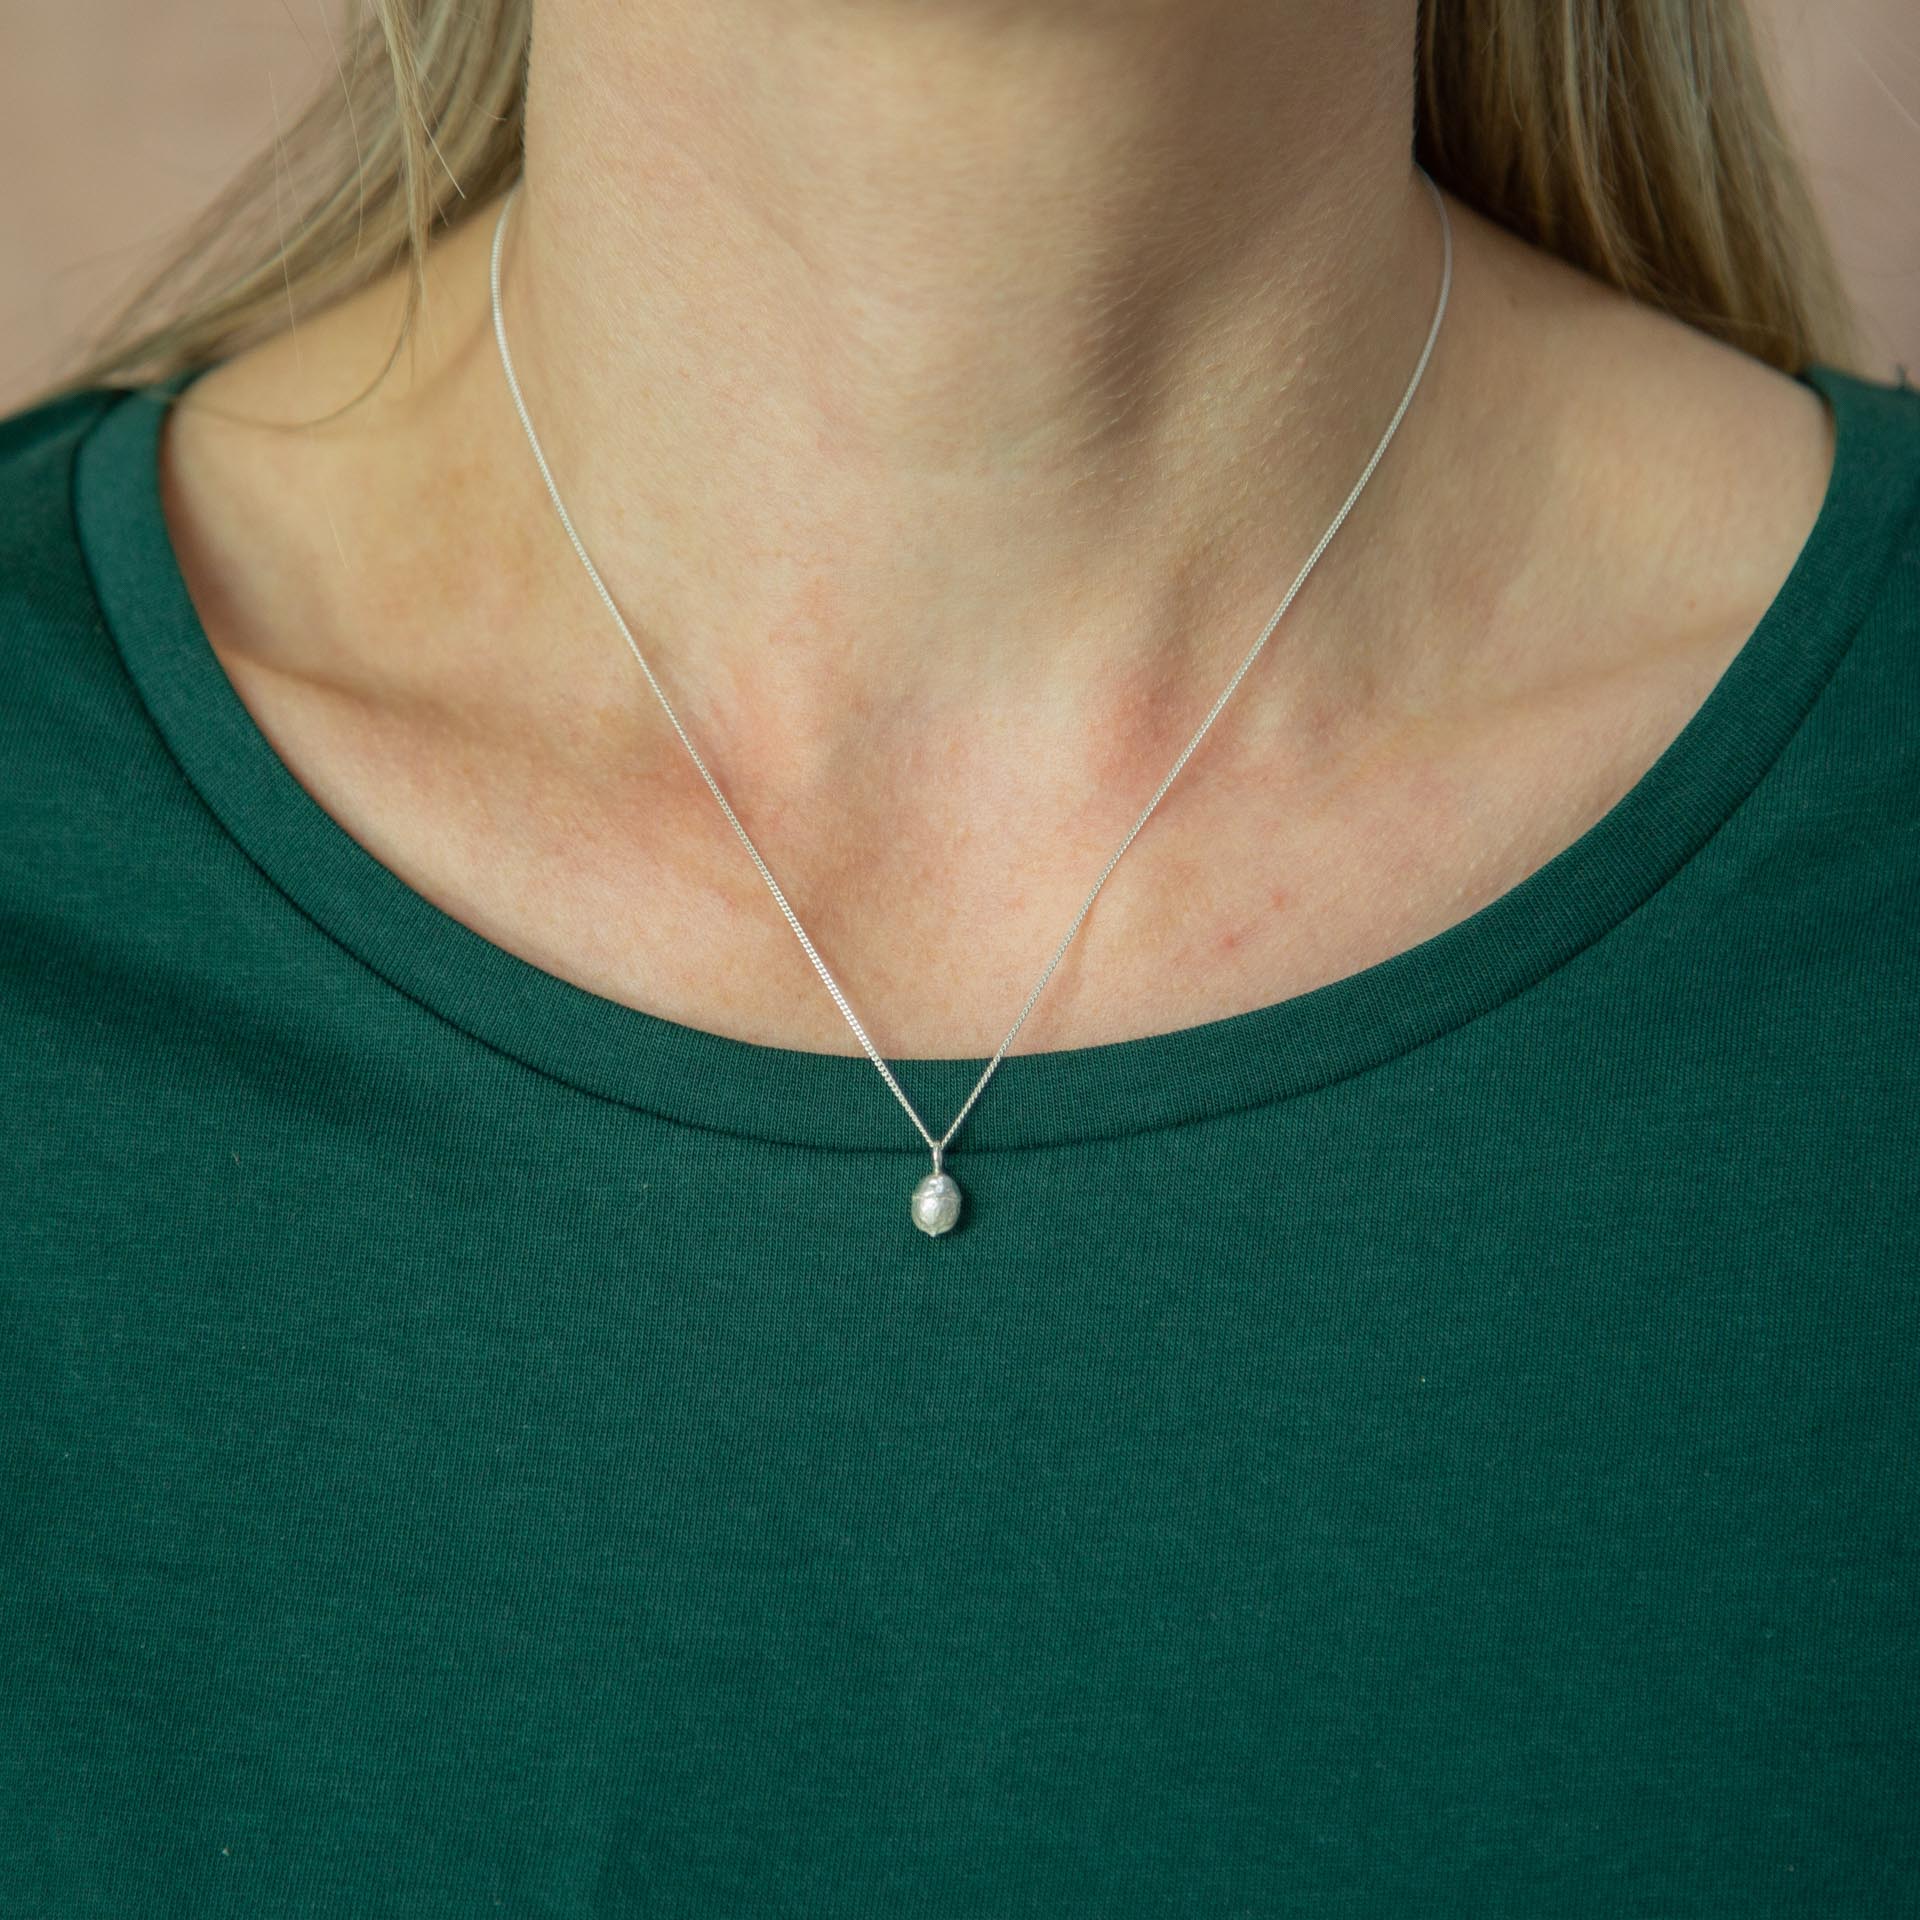 yew berry silver necklace modelled around neck on green tshirt